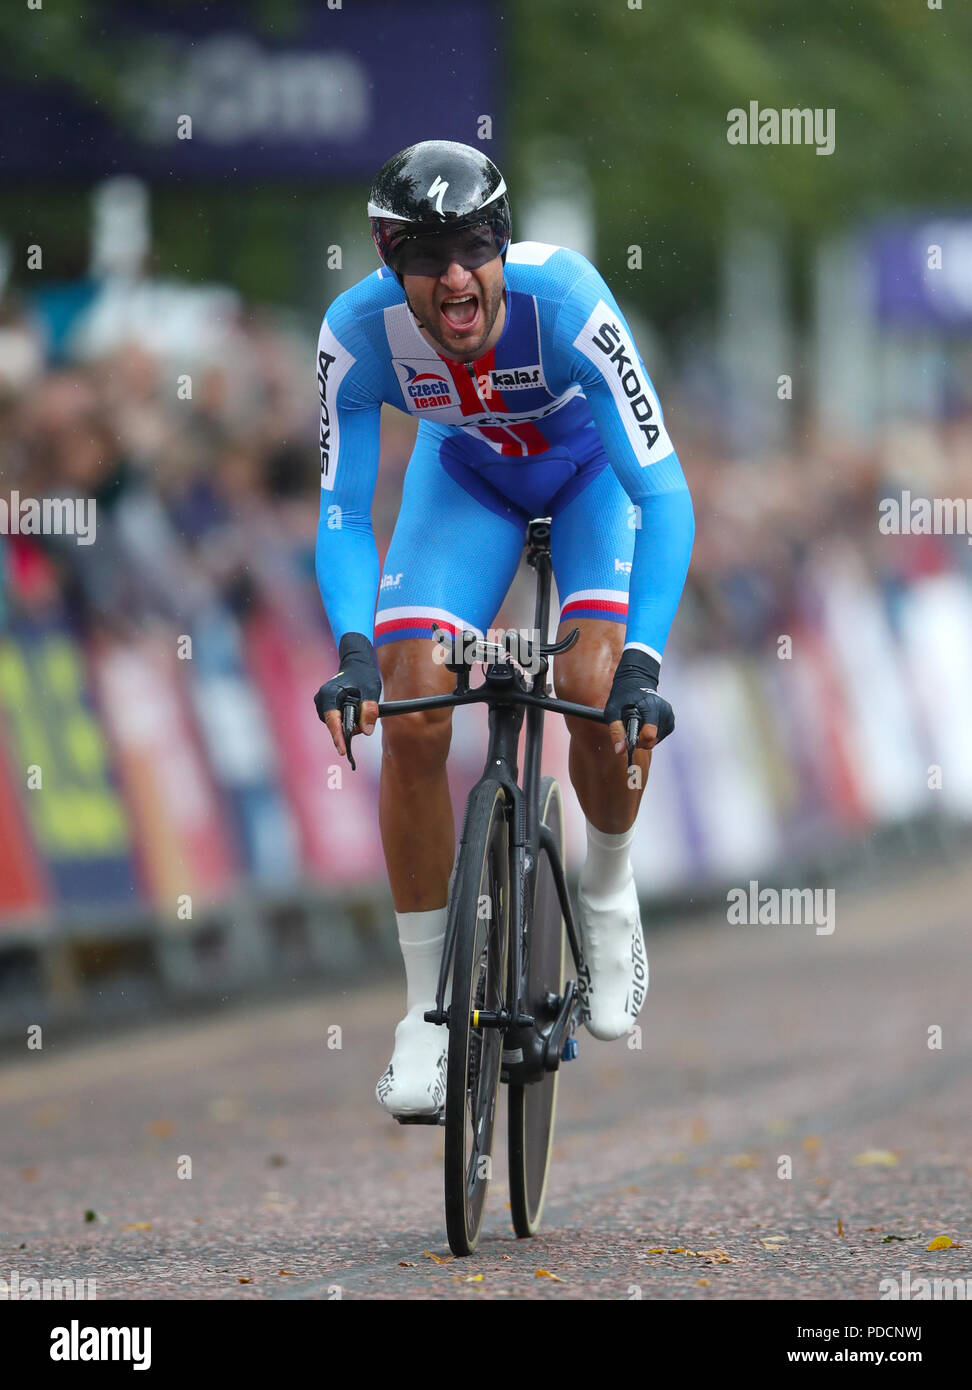 Czech Republic's Jan Barta crosses the finish line in the Men's Time Trial during day seven of the 2018 European Championships at the Glasgow Cycling Road Race Course. PRESS ASSOCIATION Photo. Picture date: Wednesday August 8, 2018. See PA story CYCLING European. Photo credit should read: John Walton/PA Wire. RESTRICTIONS: Editorial use only, no commercial use without prior permission Stock Photo